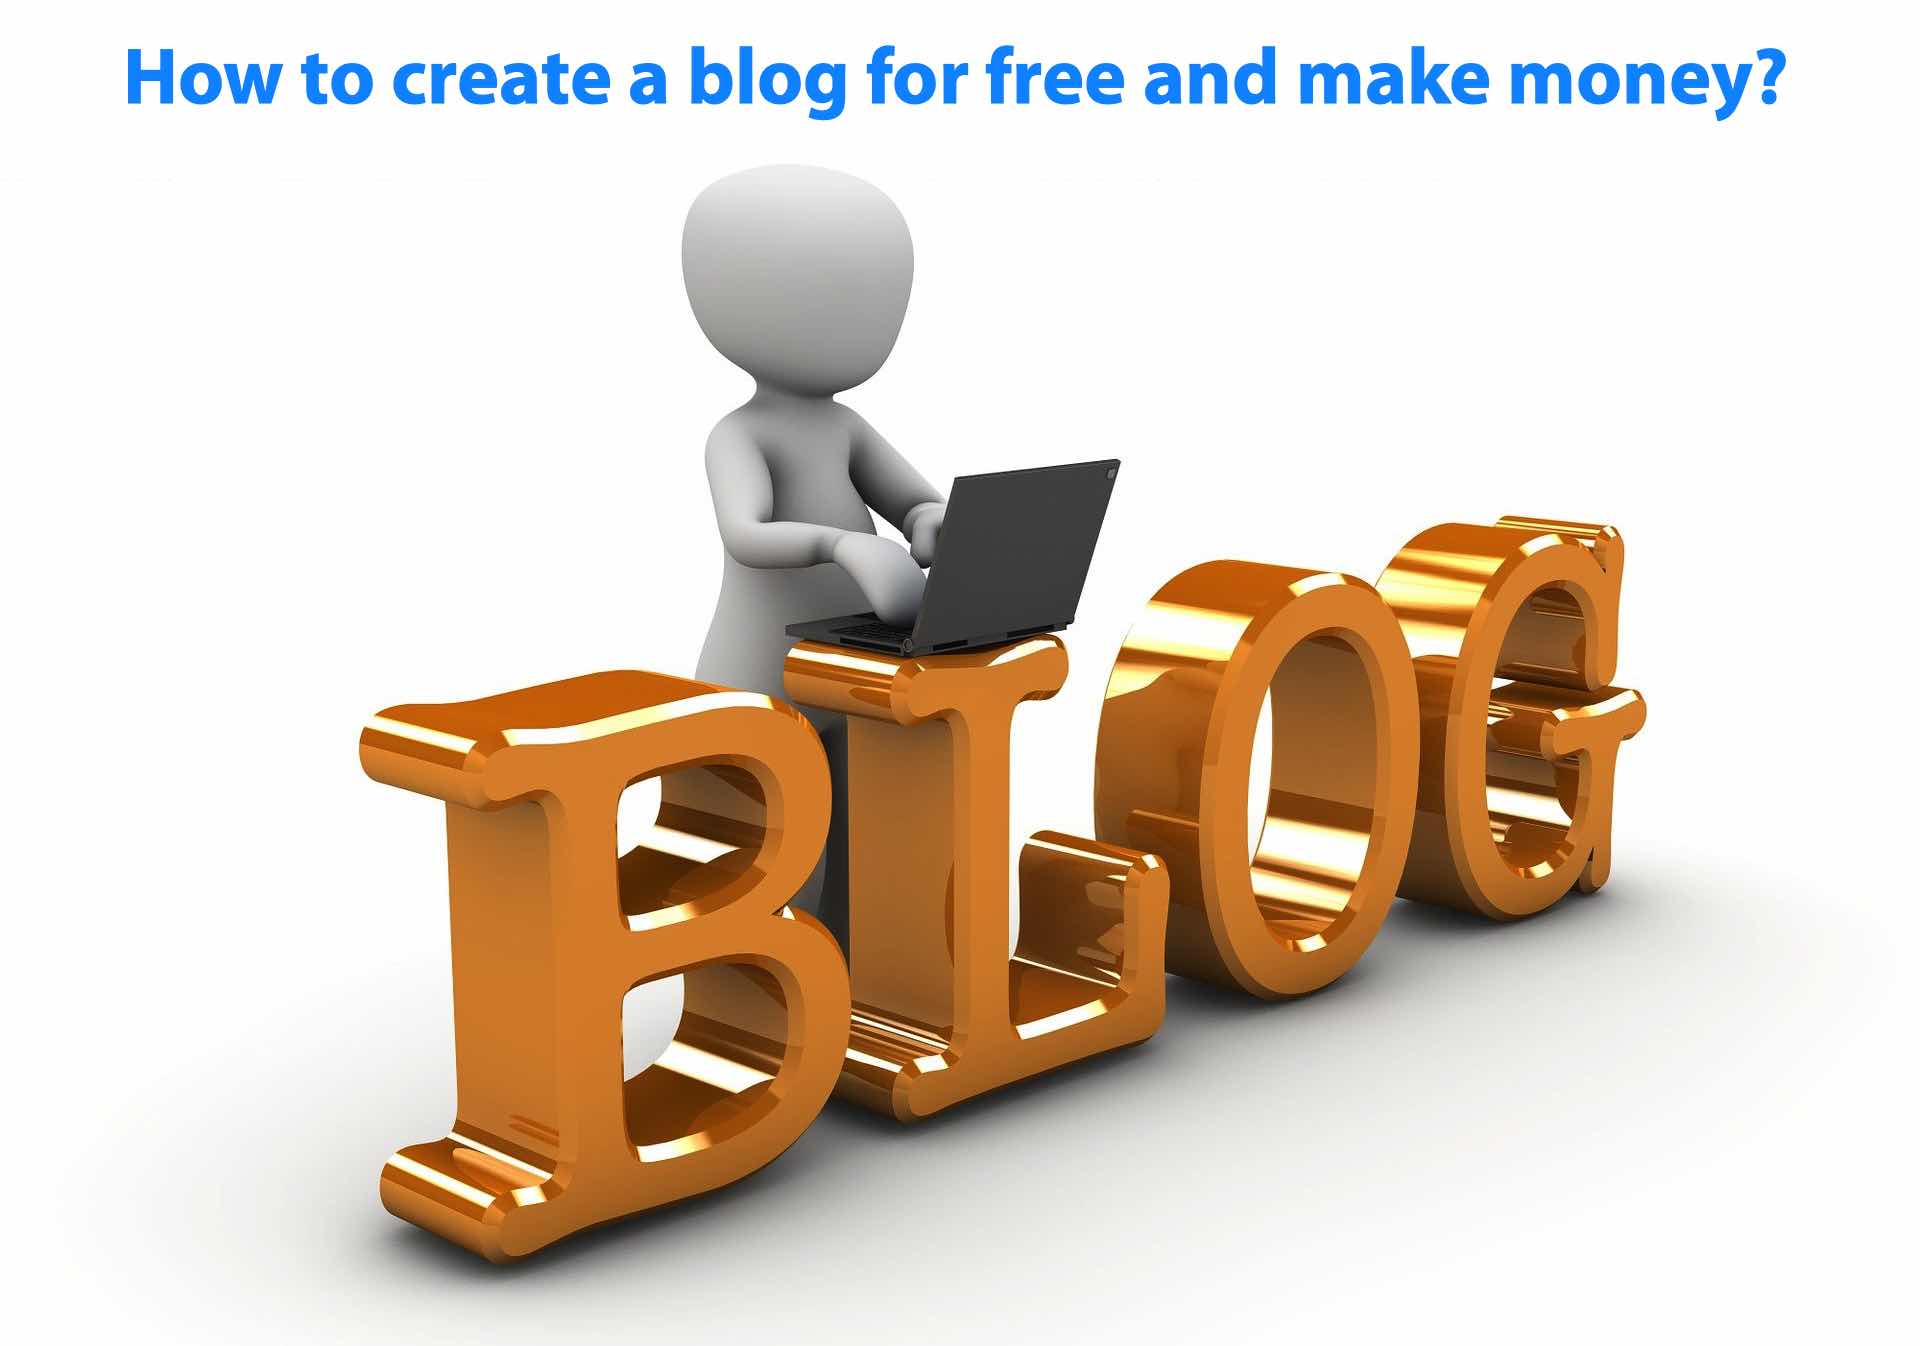 How to create a blog for free?